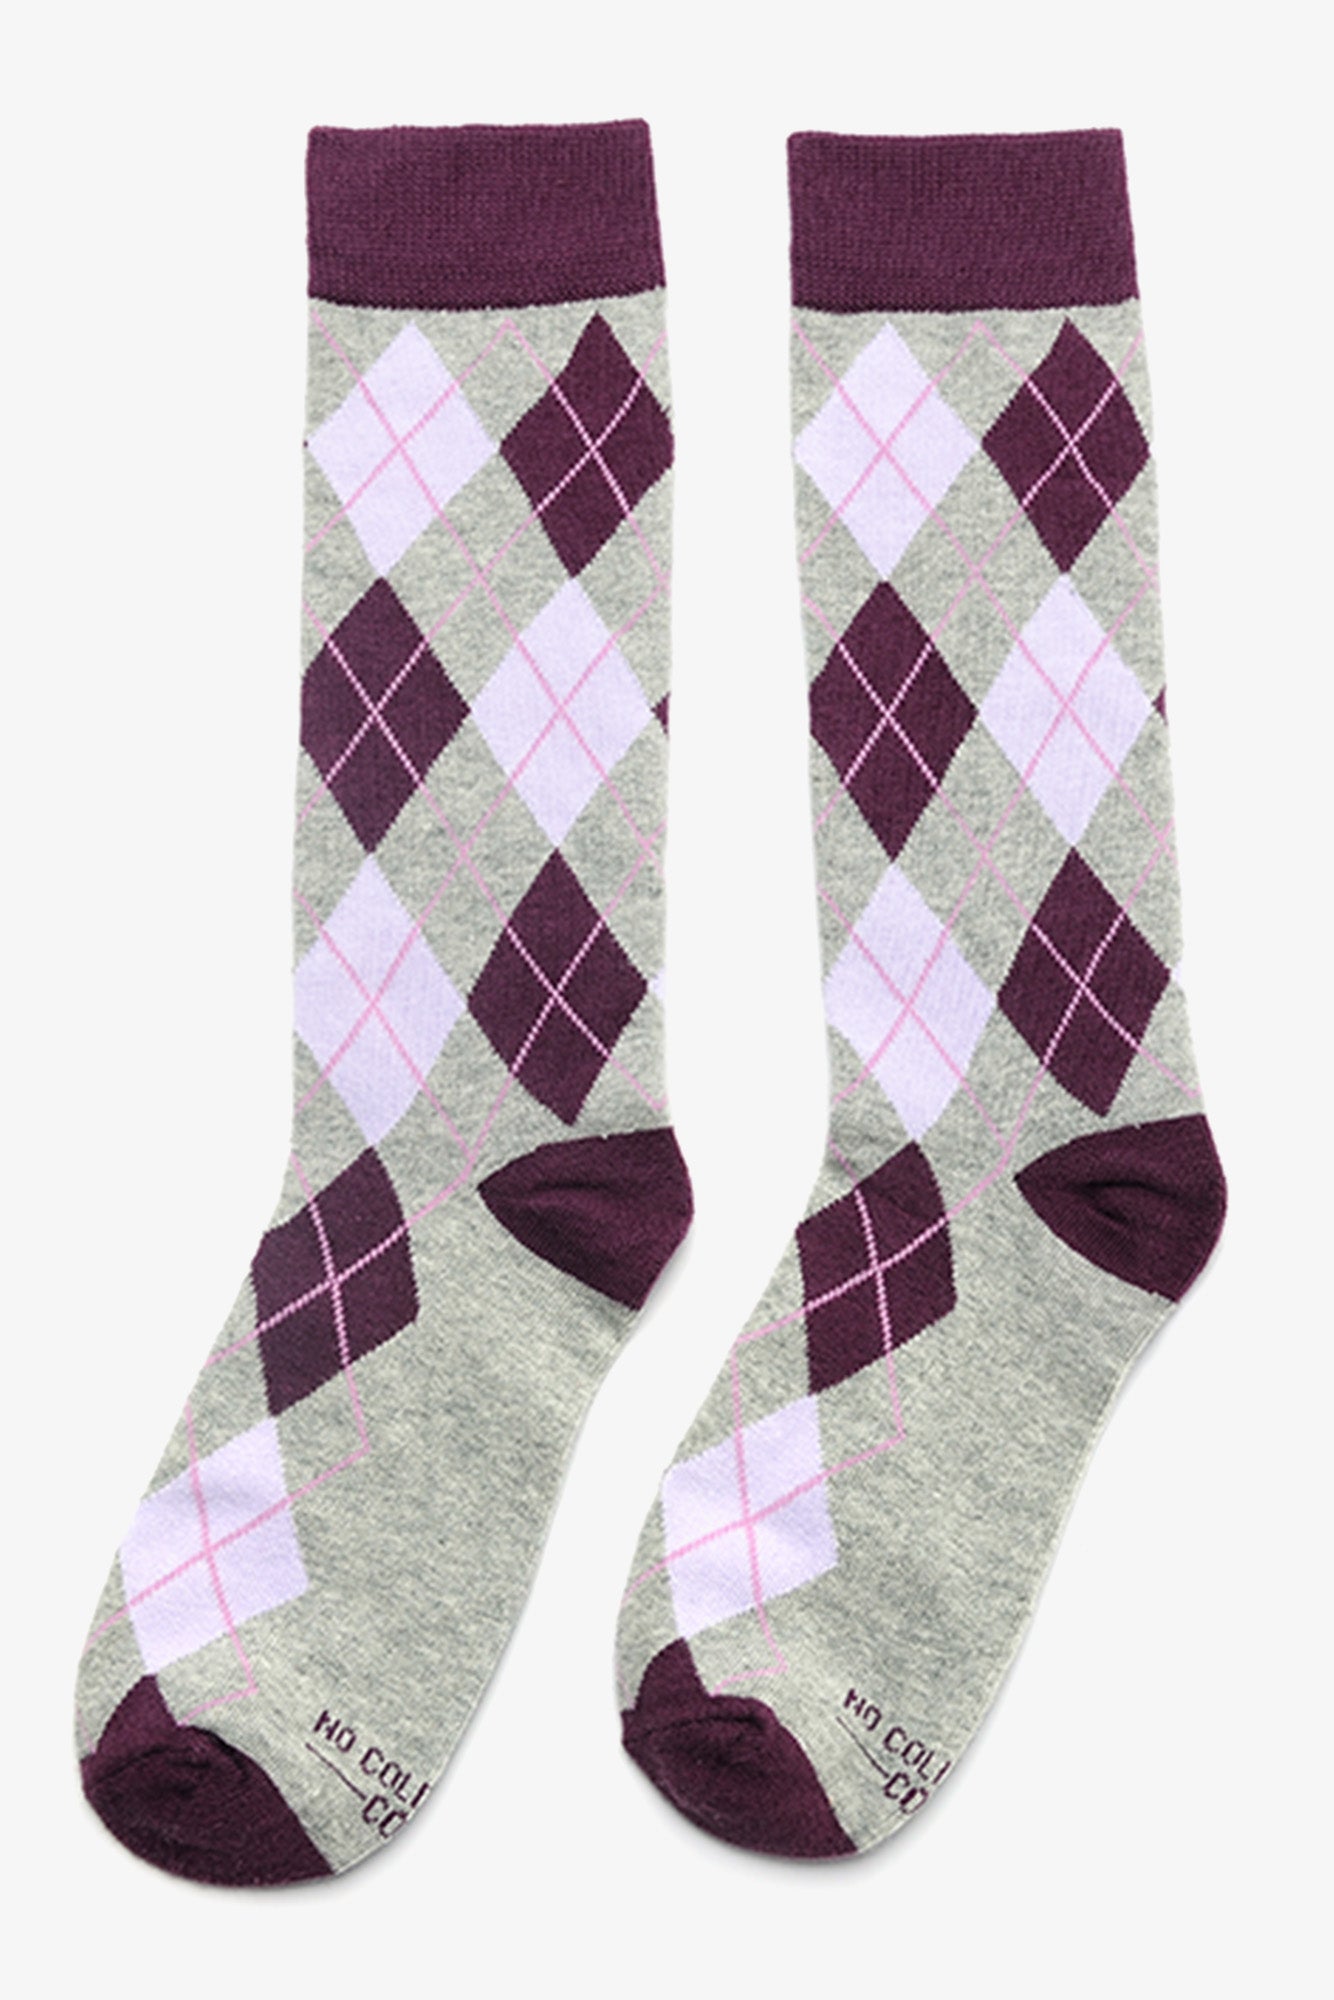 Purple and Grey Argyle Groomsmen Socks by No Cold Feet, front view